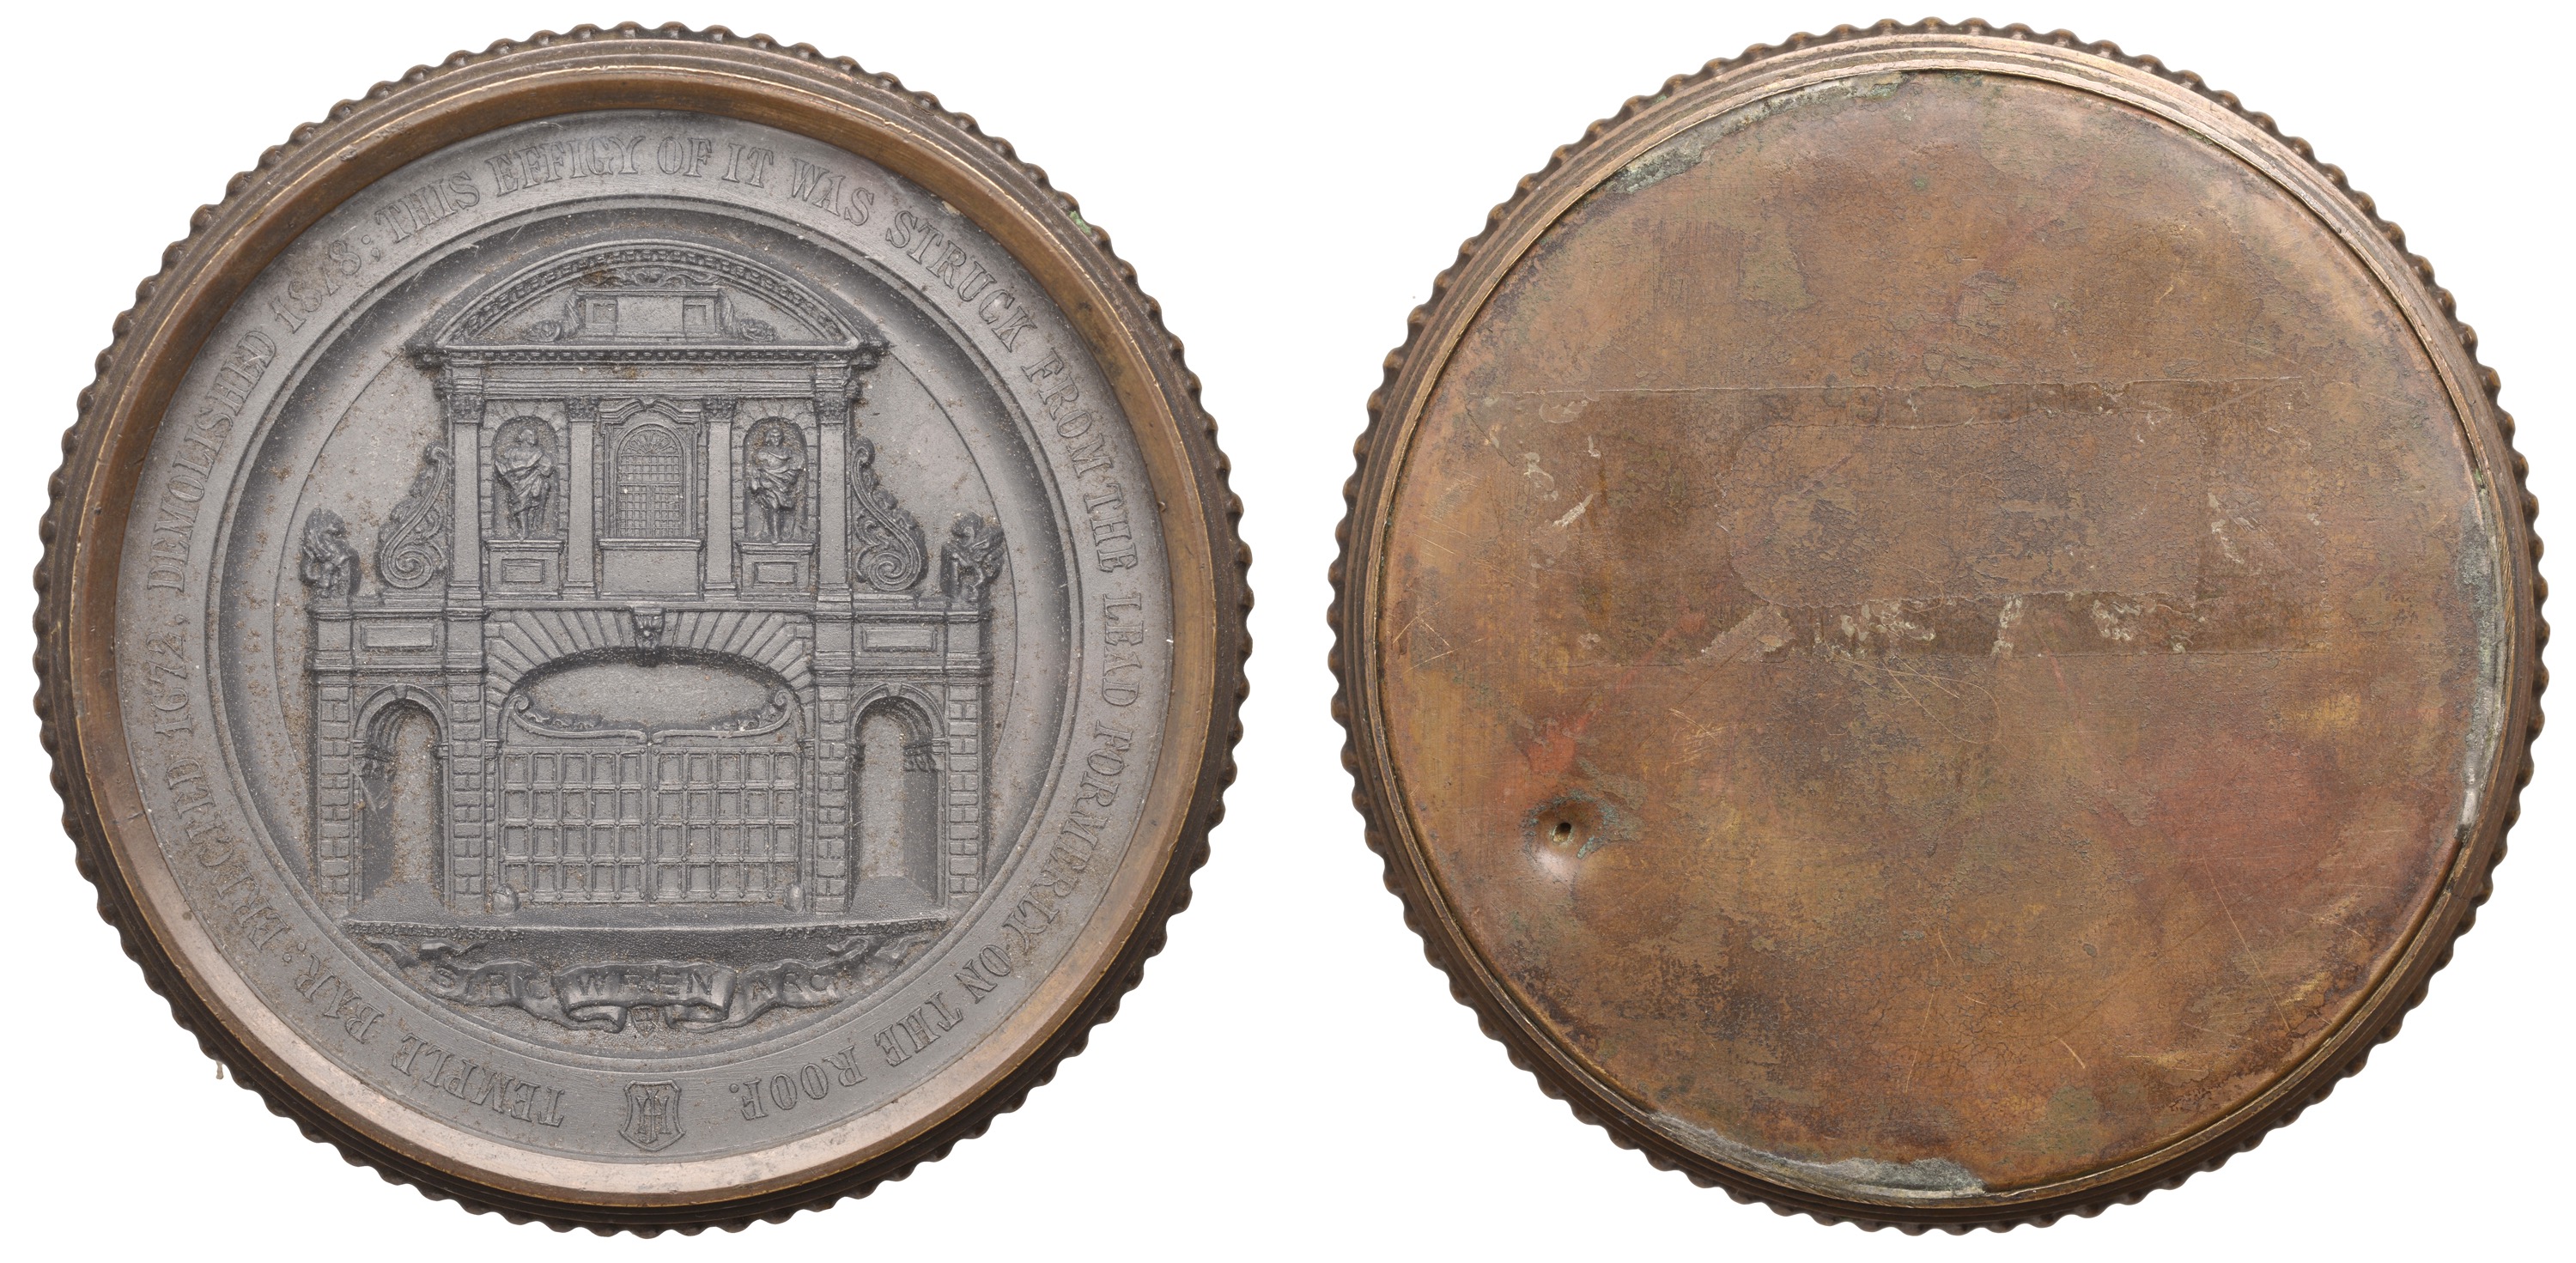 Removal of Temple Bar, 1878, a uniface lead medal by C.H. and J. Mabey for Taylor, Foot and...